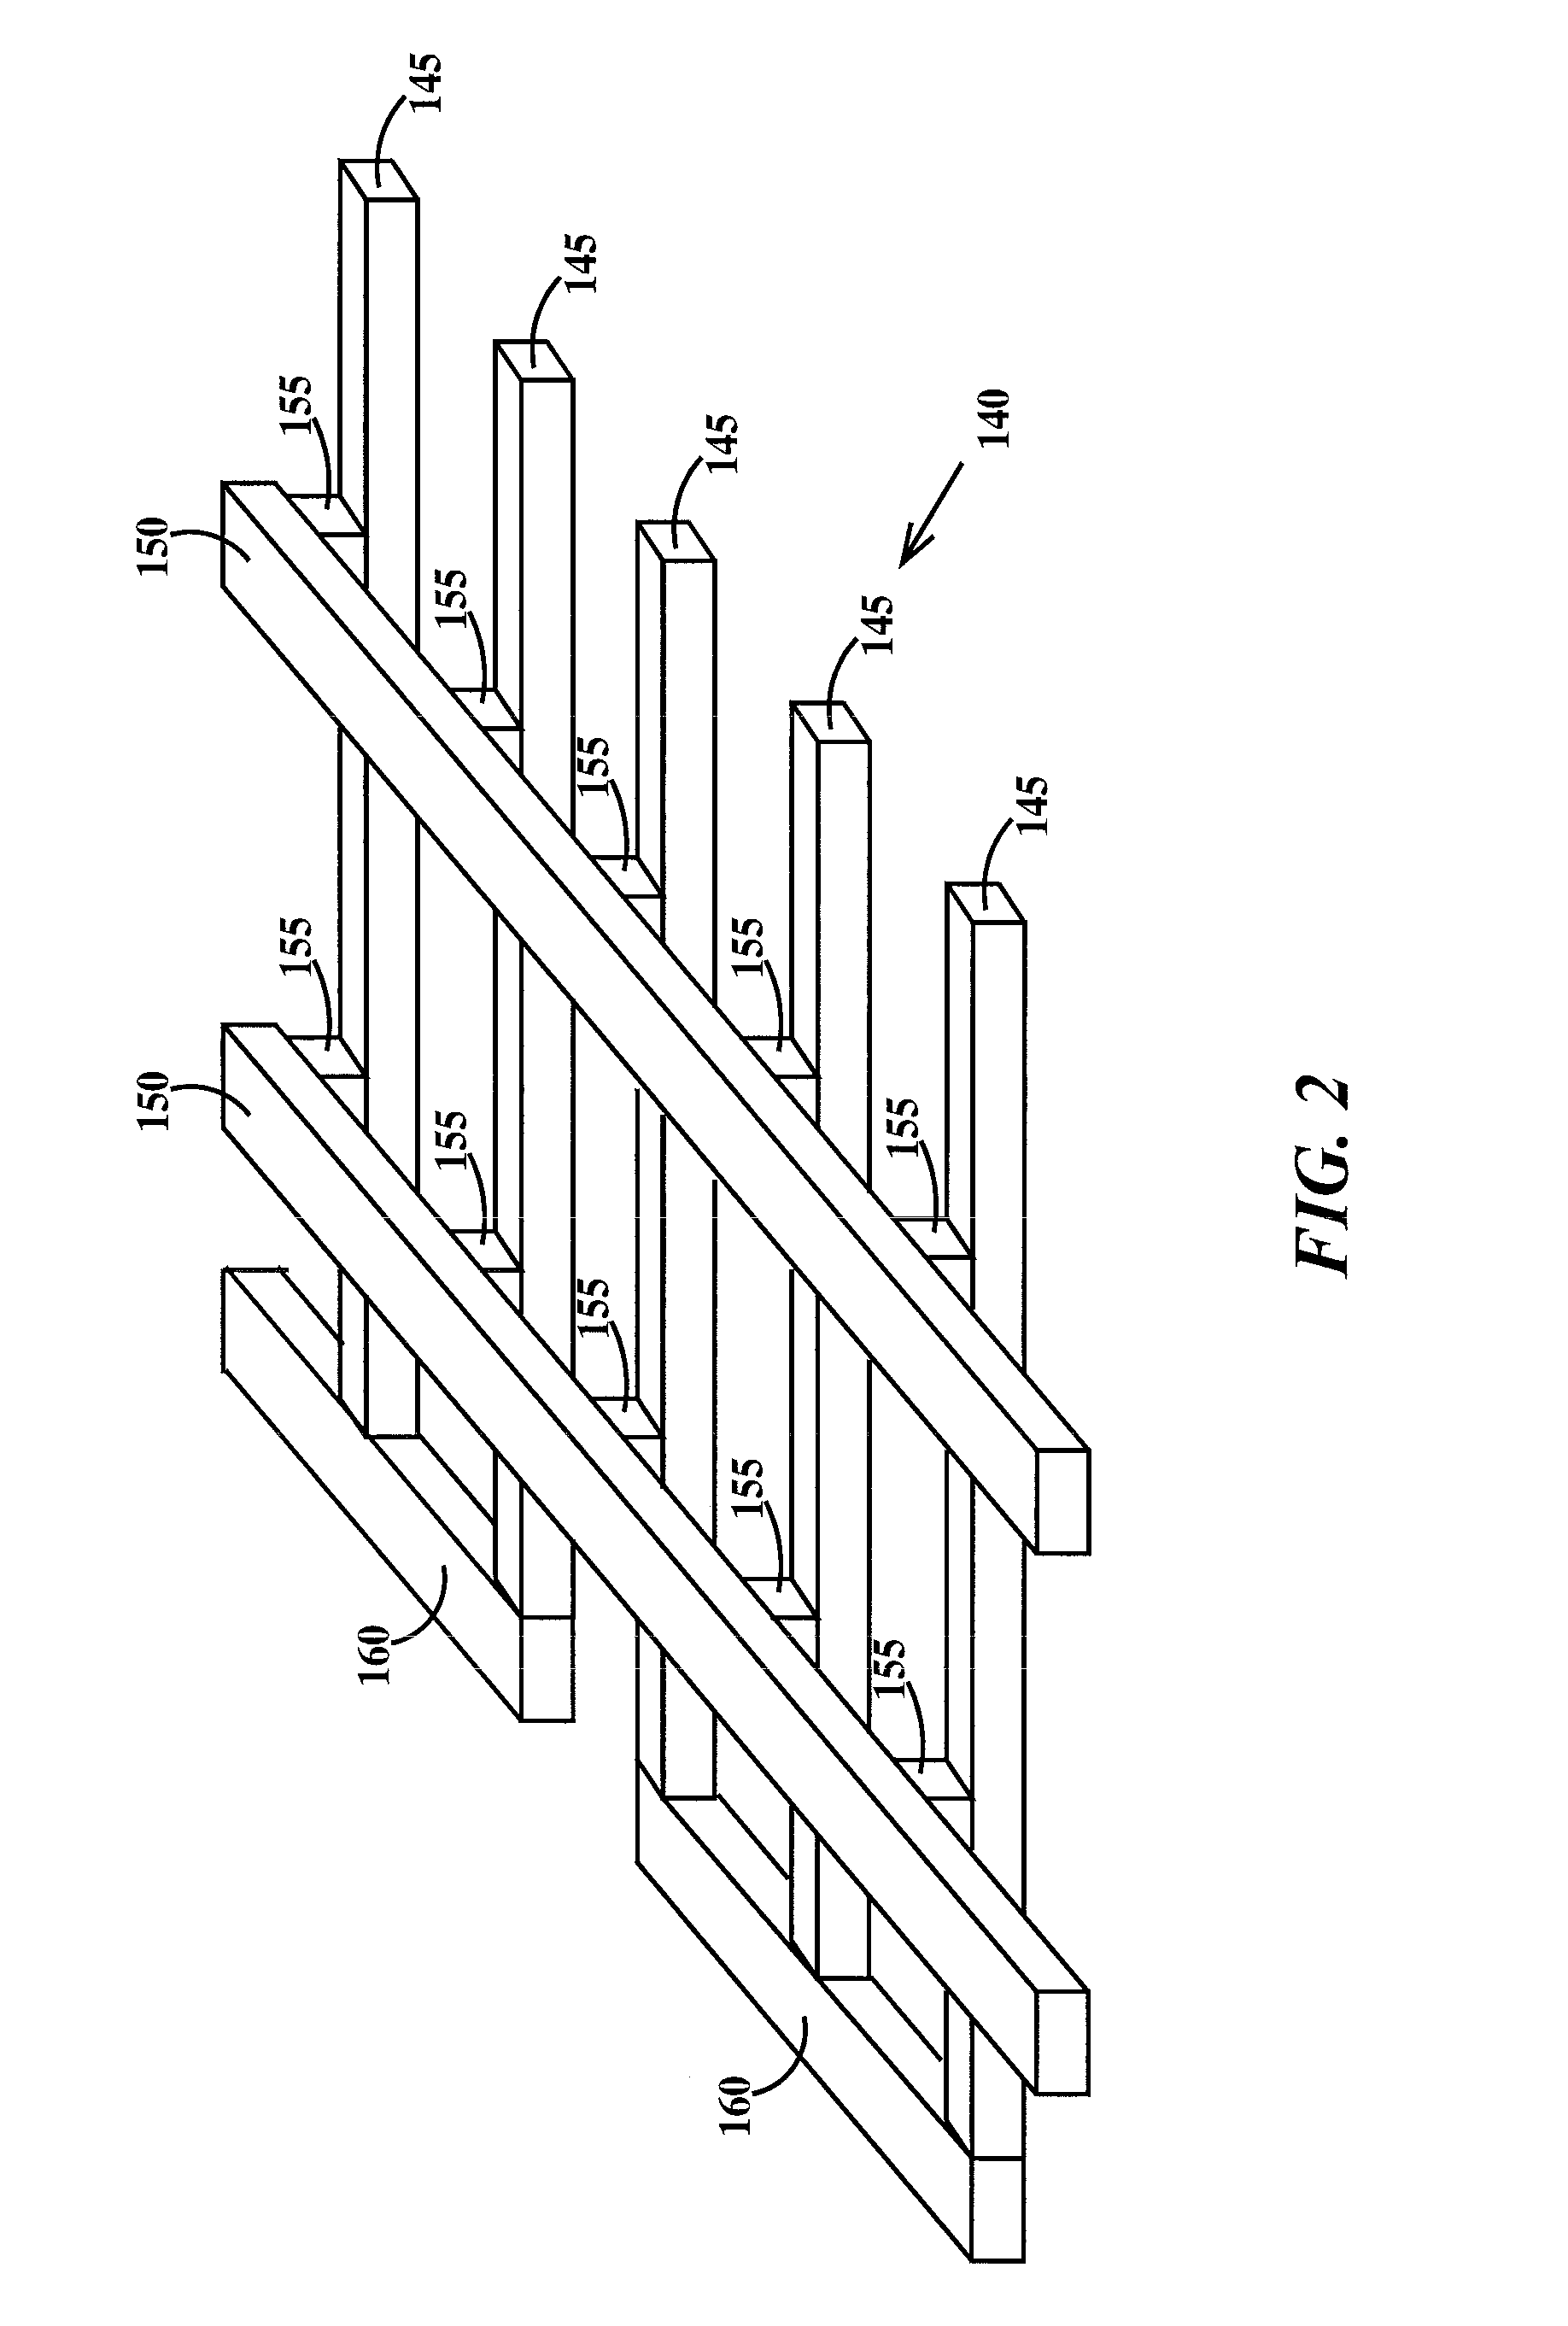 Multi-bit high-density memory device and architecture and method of fabricating multi-bit high-density memory devices